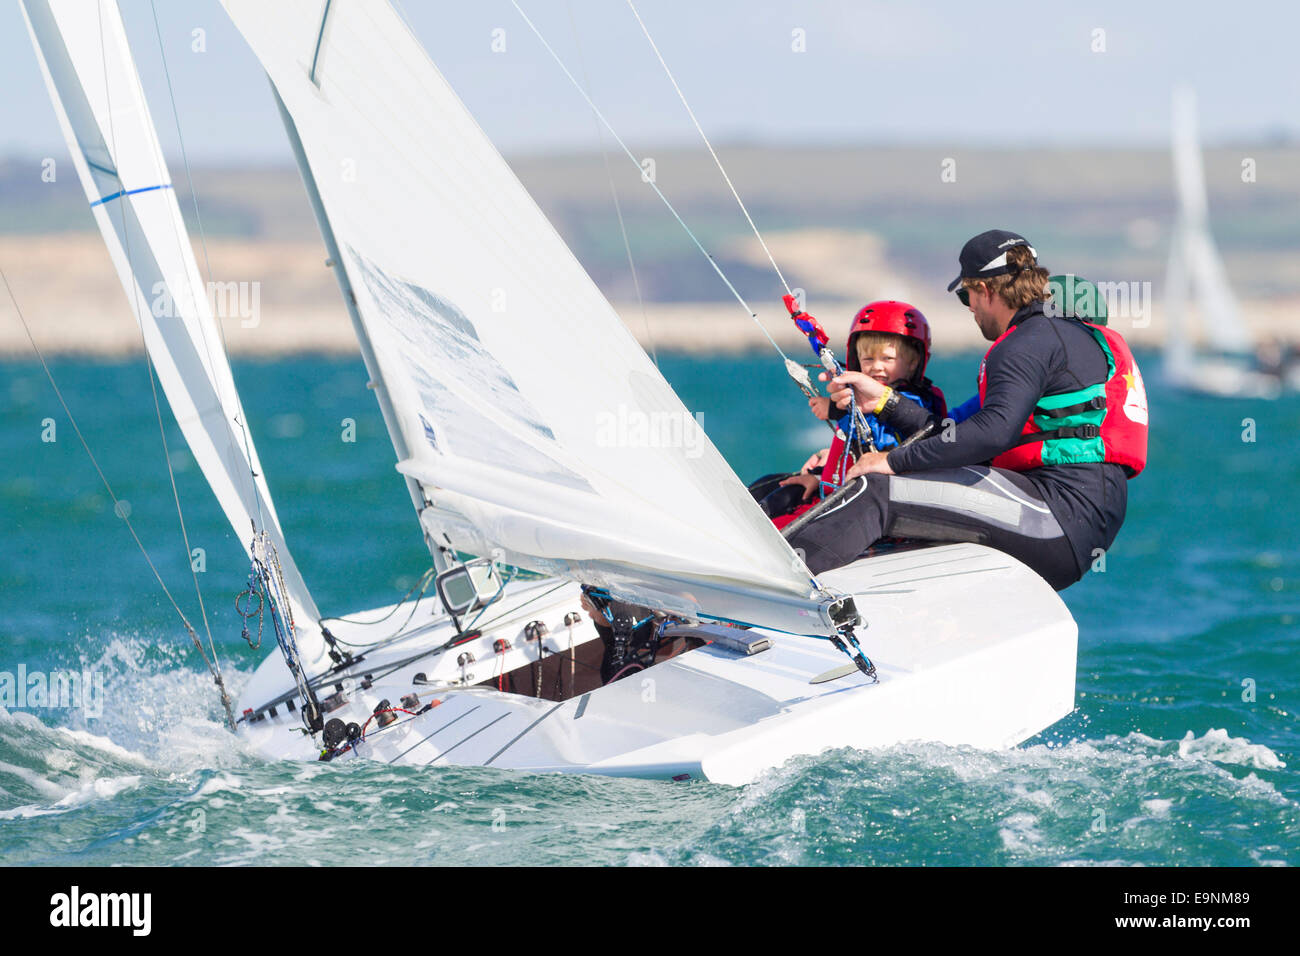 Freddie Simpson 4, and Iain Percy aboard their Star class keel-boat for the Bart's Bash sailing regatta Stock Photo